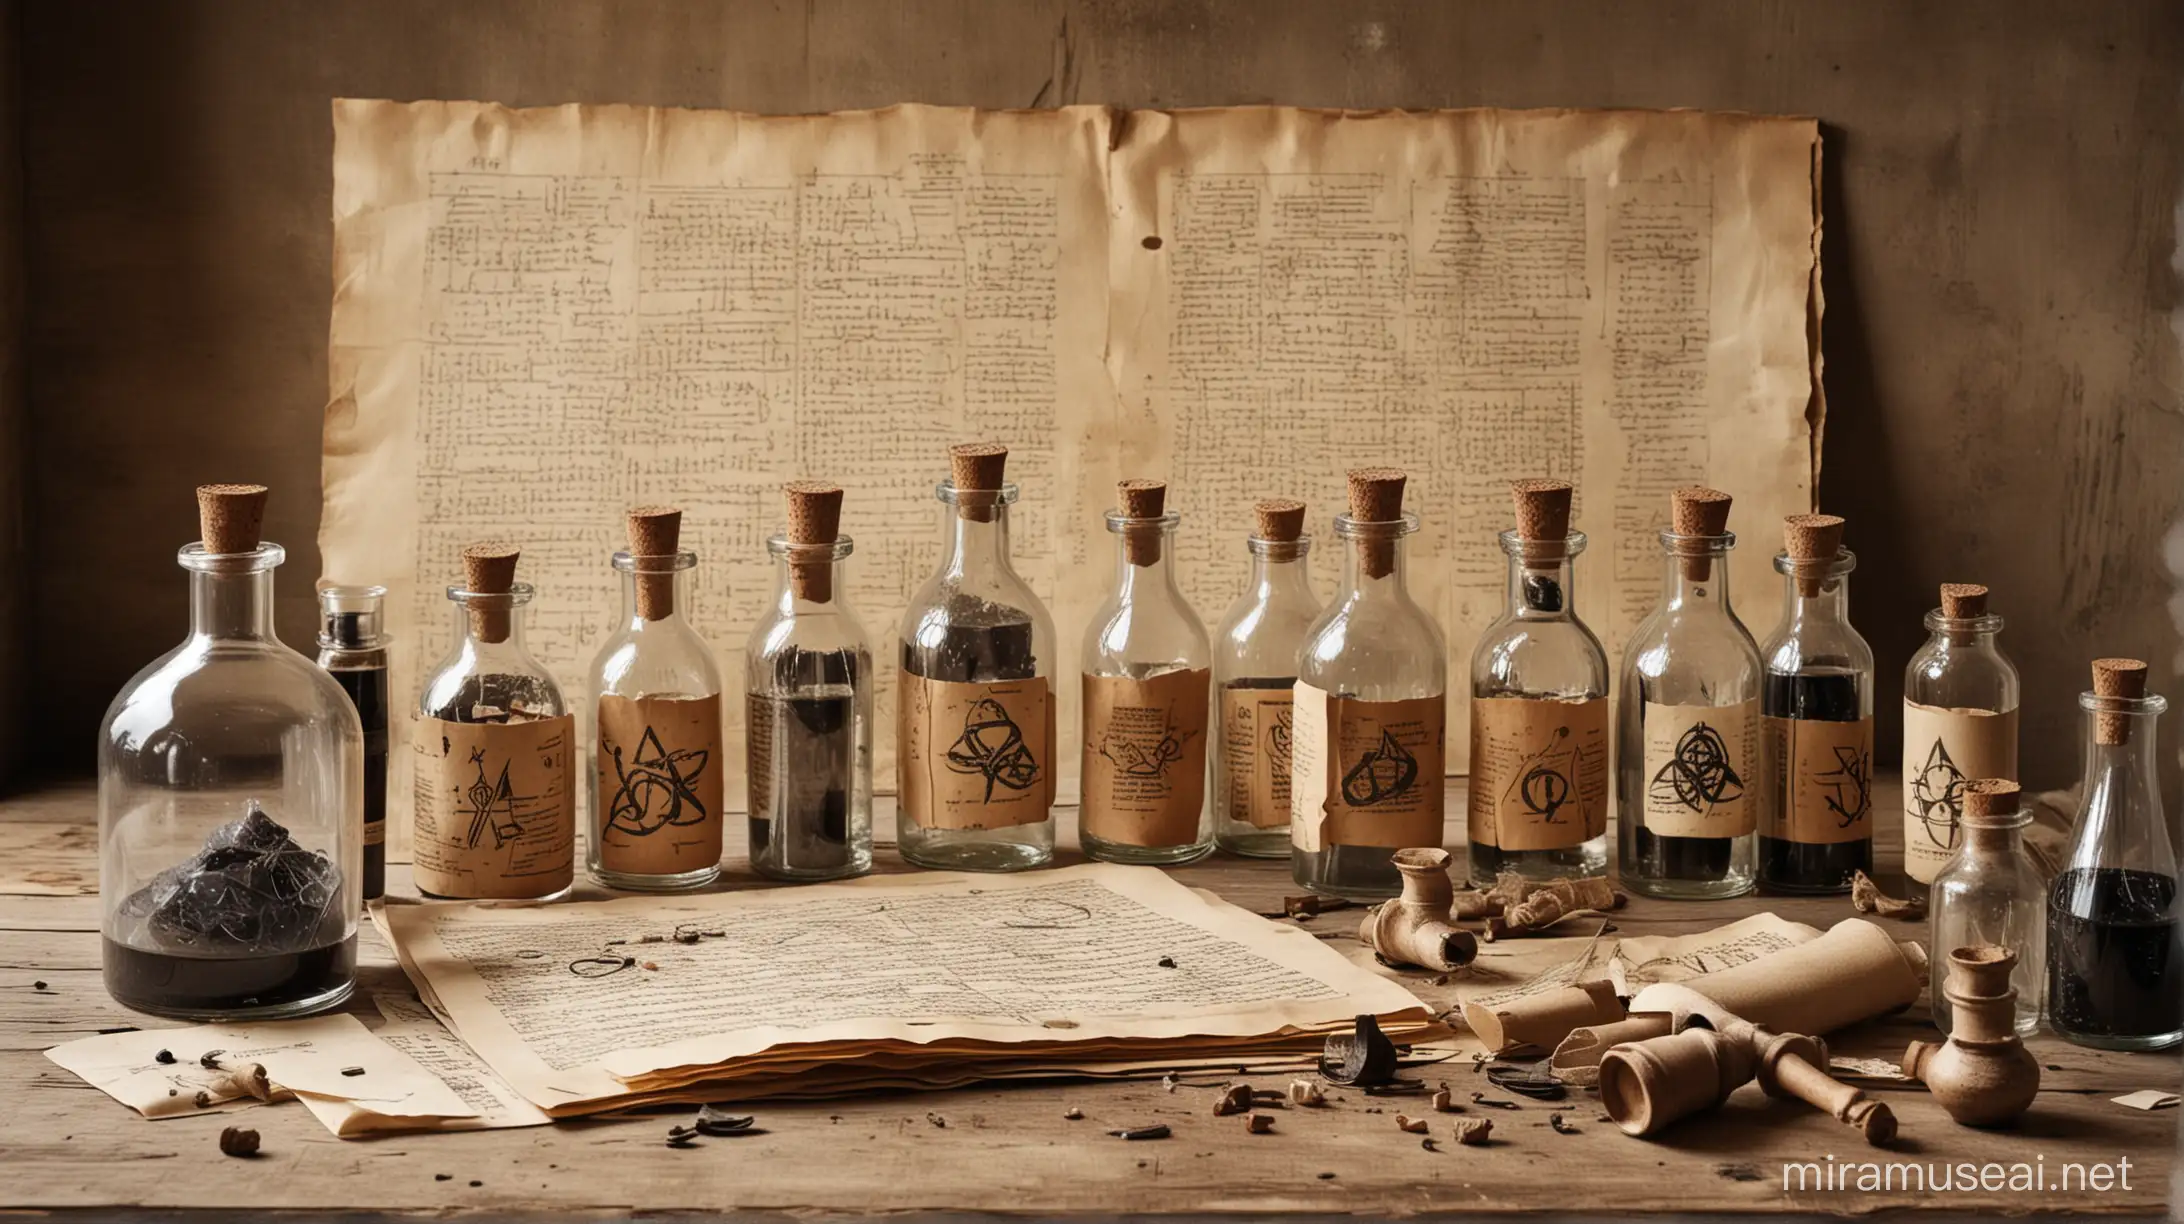 Alchemy laboratorium with bottles and old papers with scirbbled symbols
